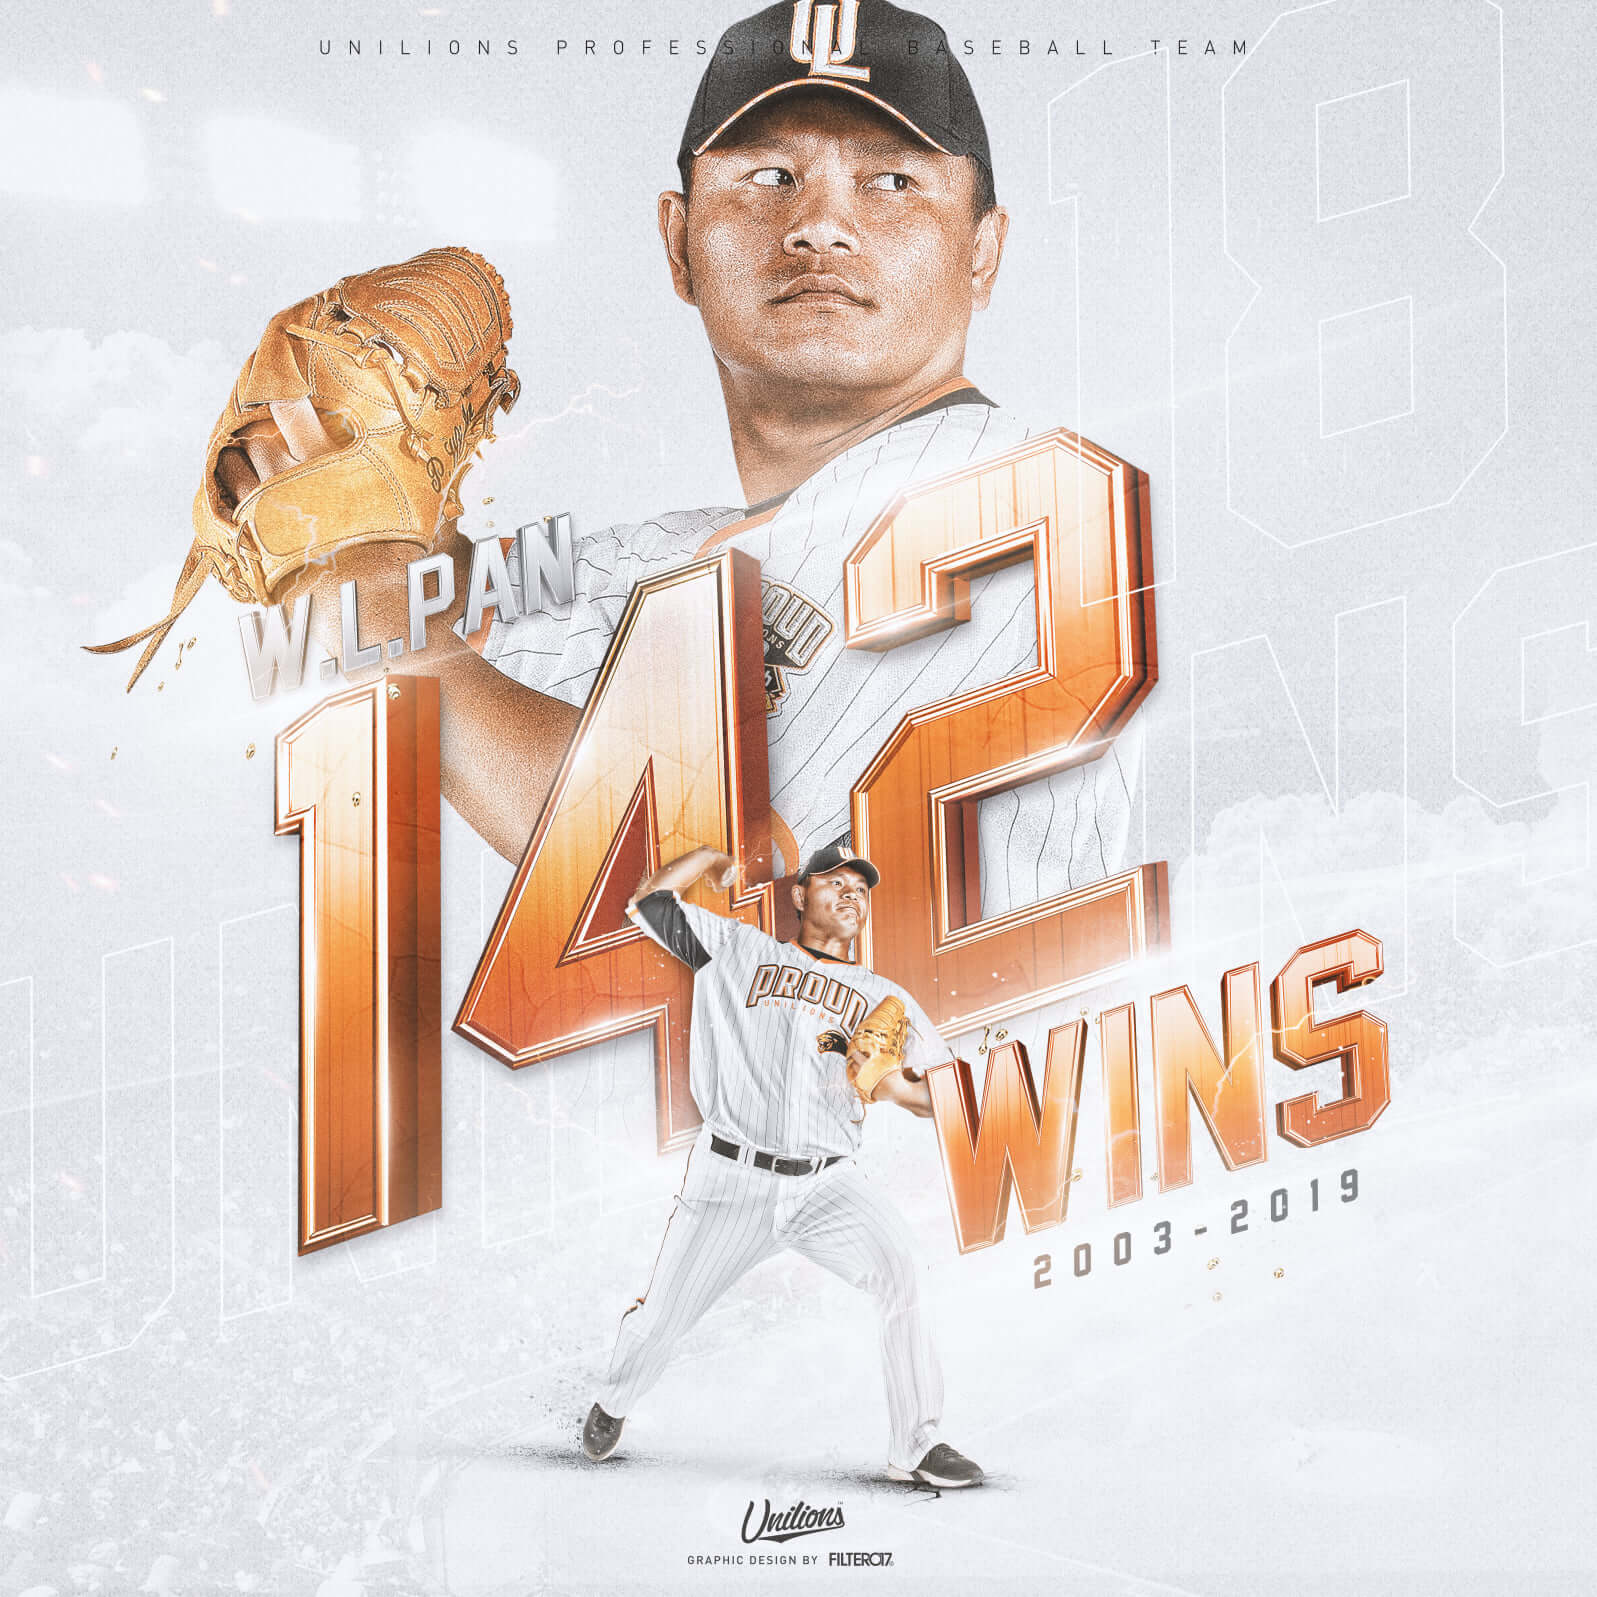 Pan Wei-Lun Sets CPBL Record With 142 Career Wins